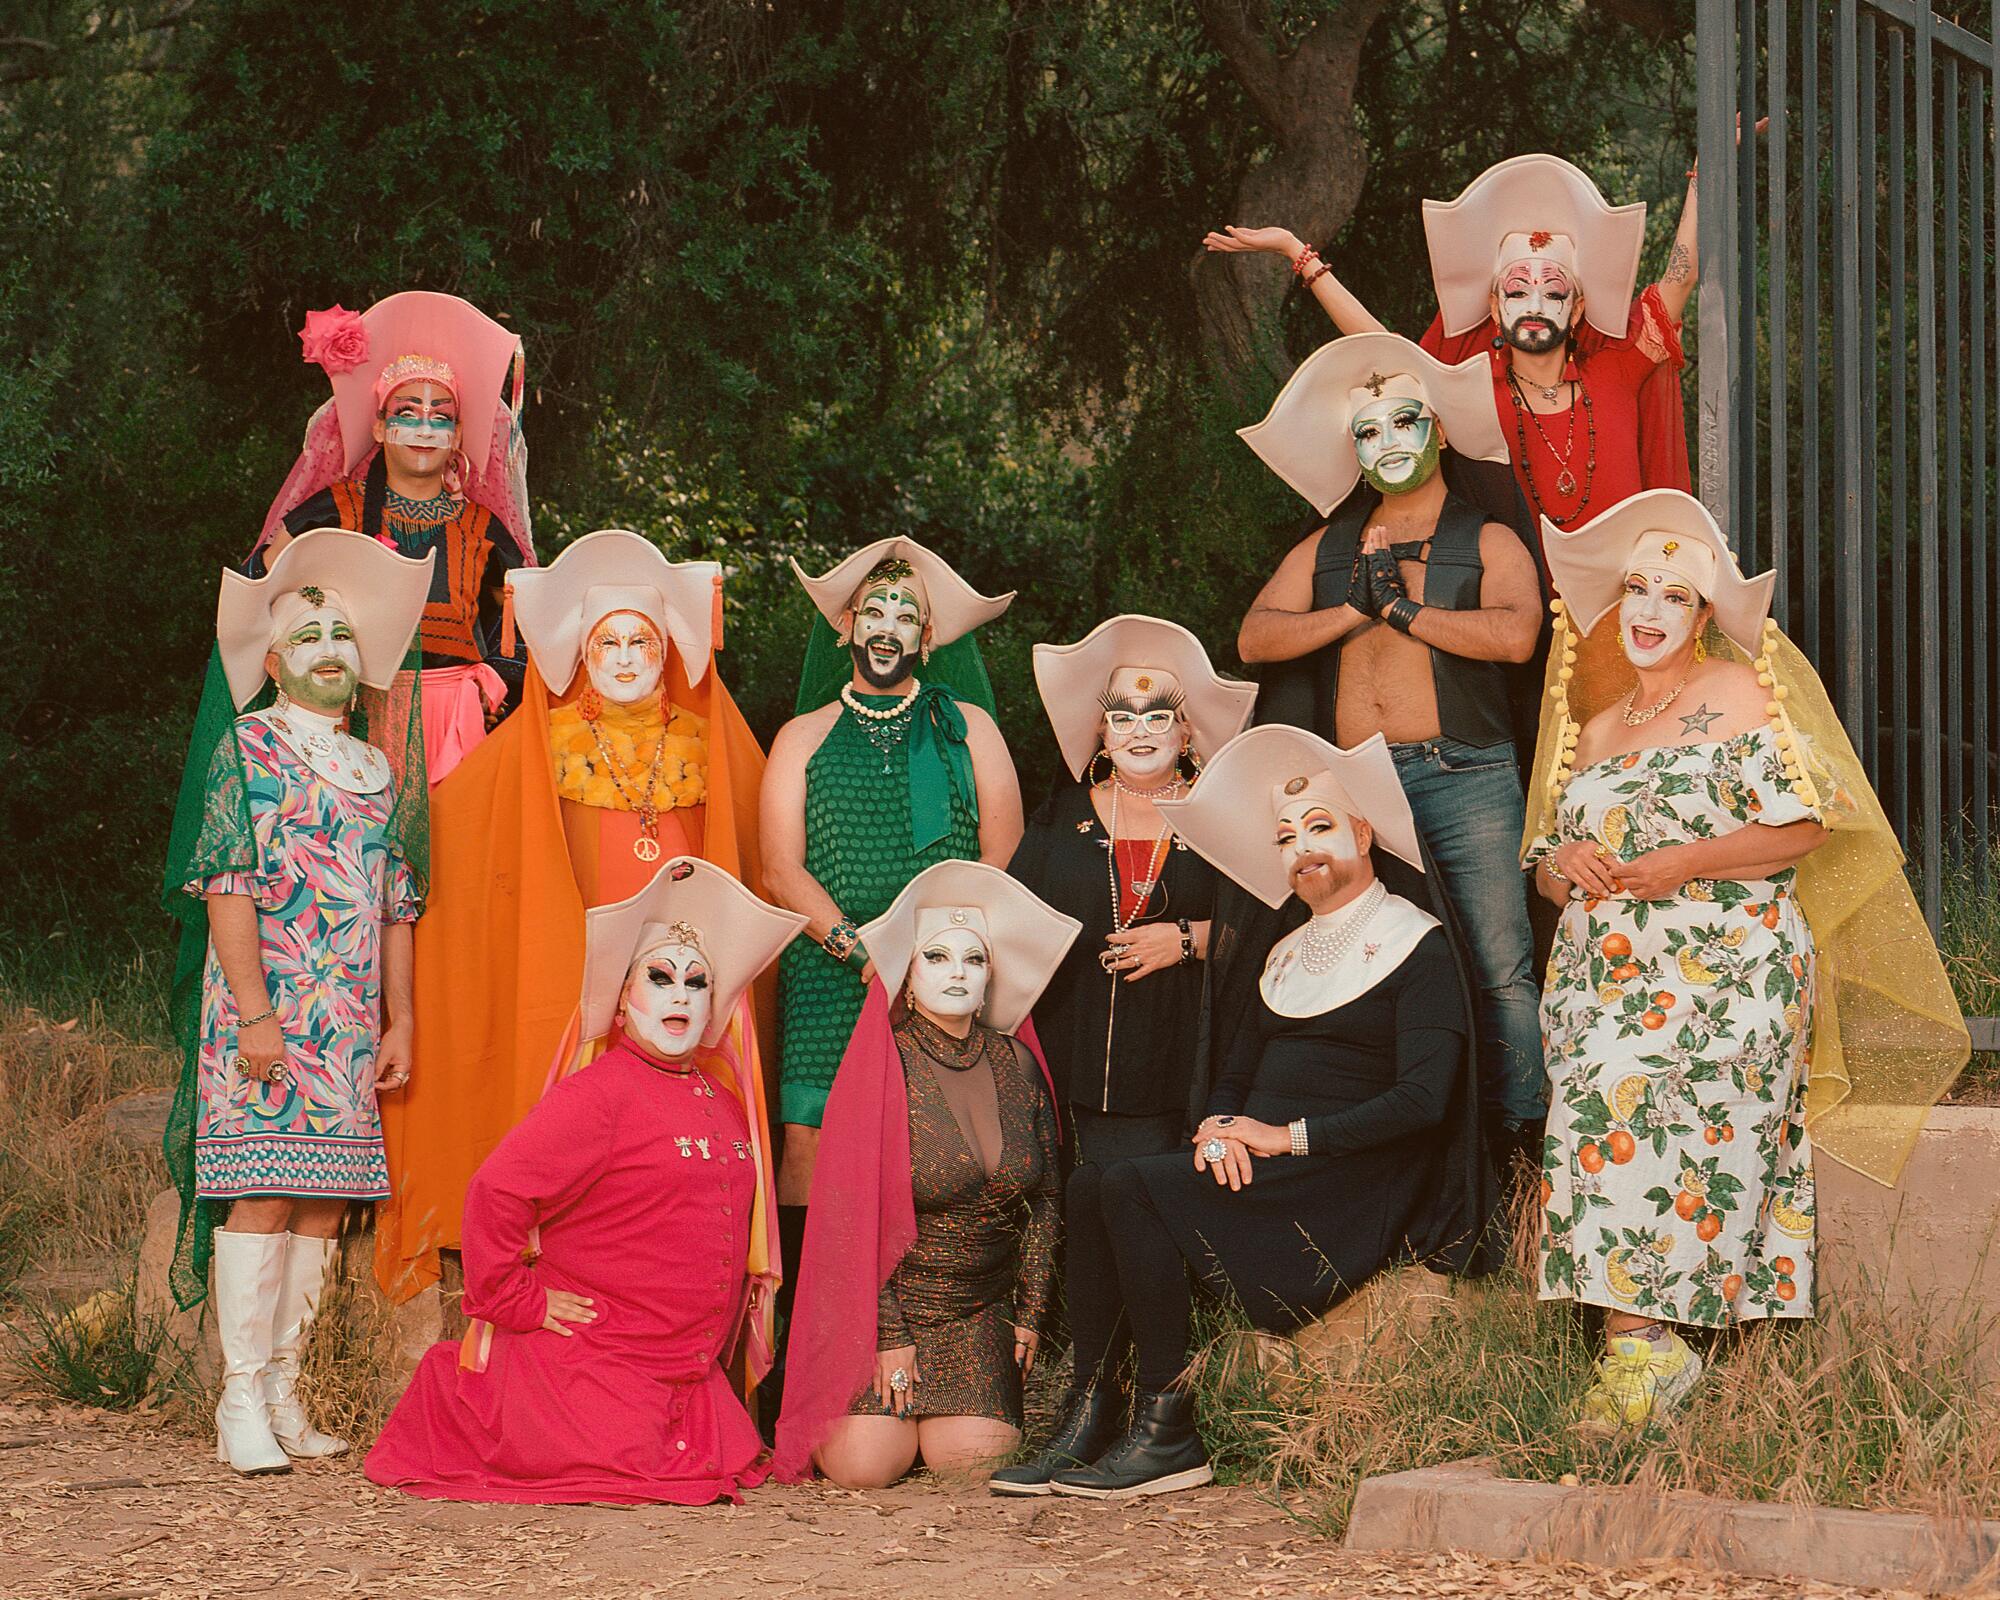 Group portrait of the Sisterhood of Perpetual Indulgence, a group of drag nuns, outdoors.